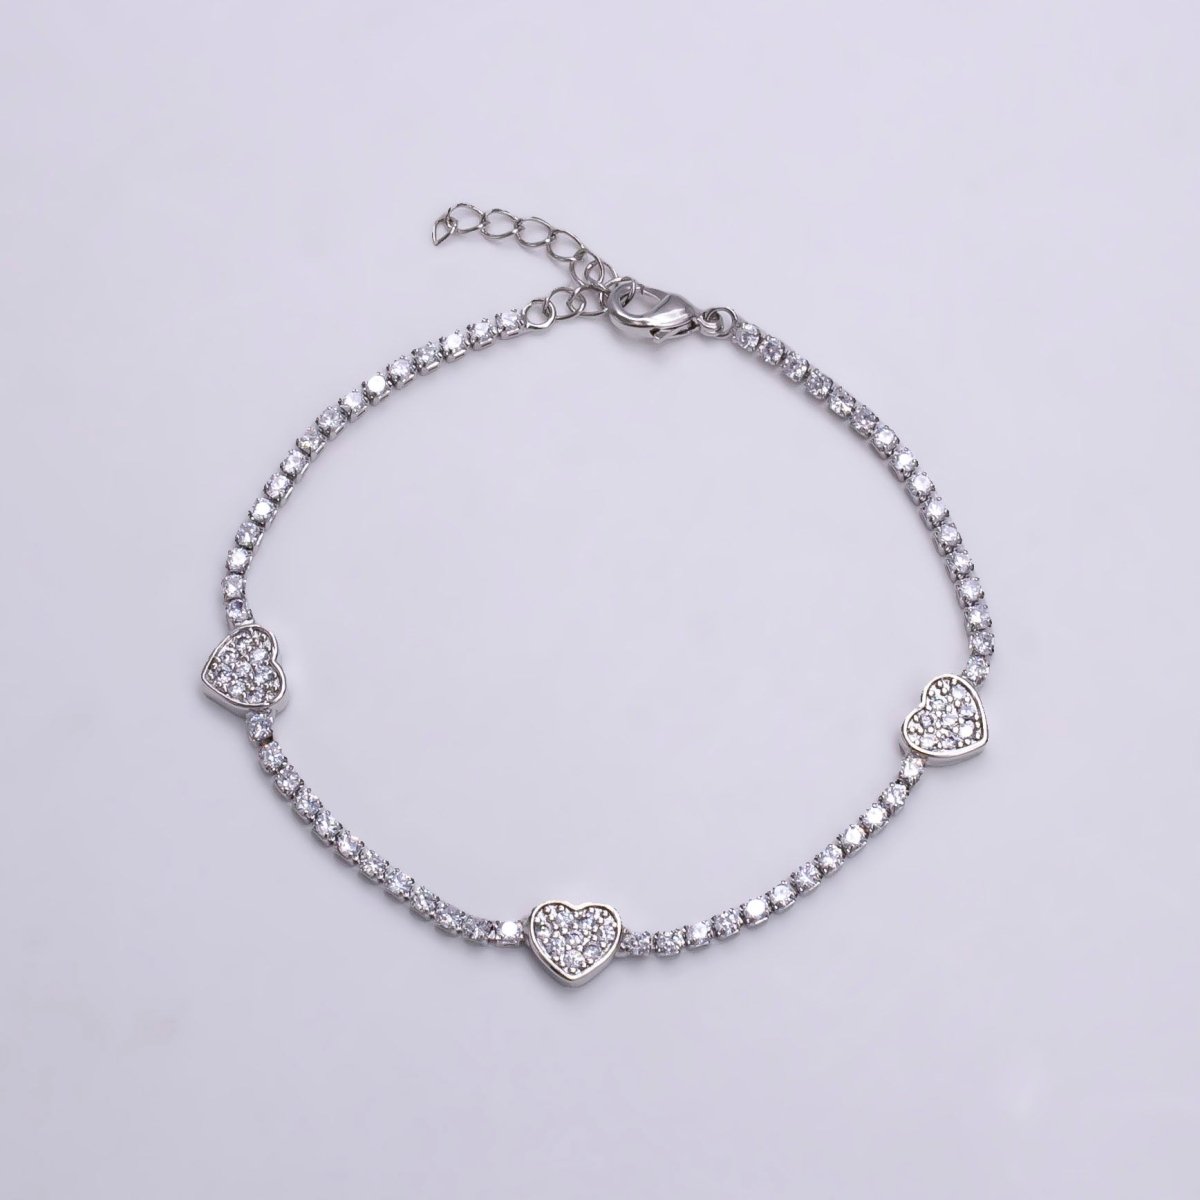 14K Gold Filled Clear Micro Paved CZ Heart Tennis Chain 7 Inch Bracelet in Gold & Silver | WA-2129 WA-2130 - DLUXCA